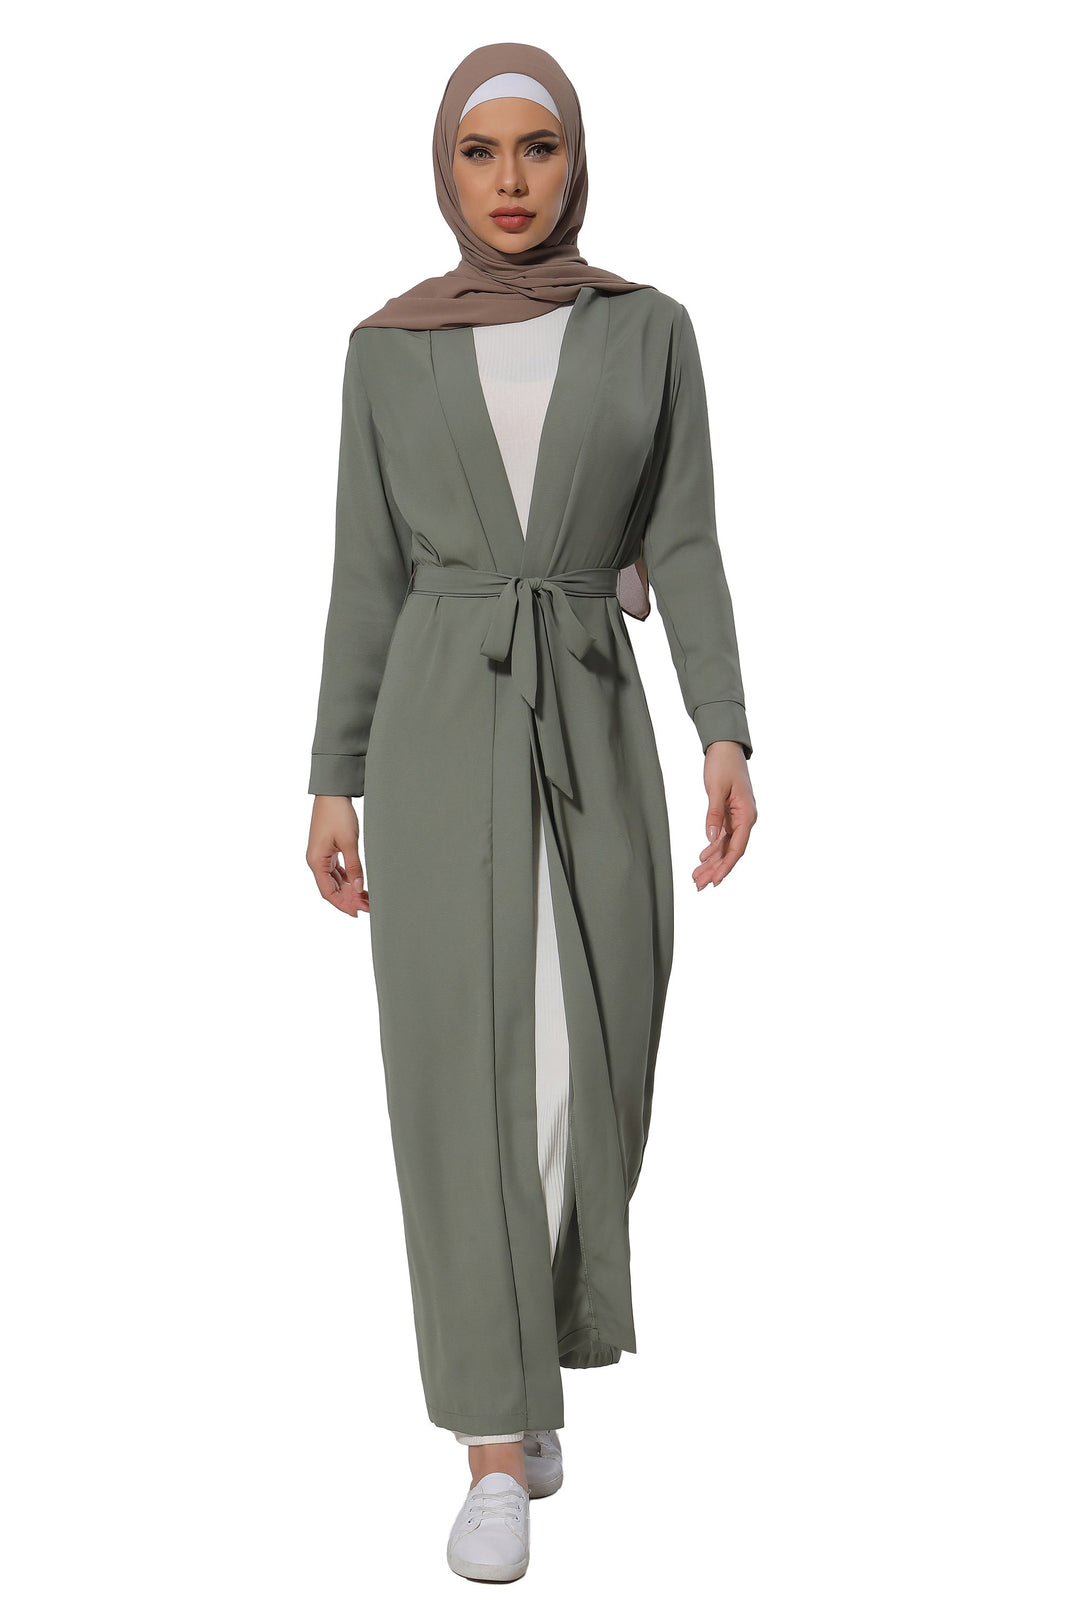 Urban Modesty - Olive Belted Open Abaya-CLEARANCE